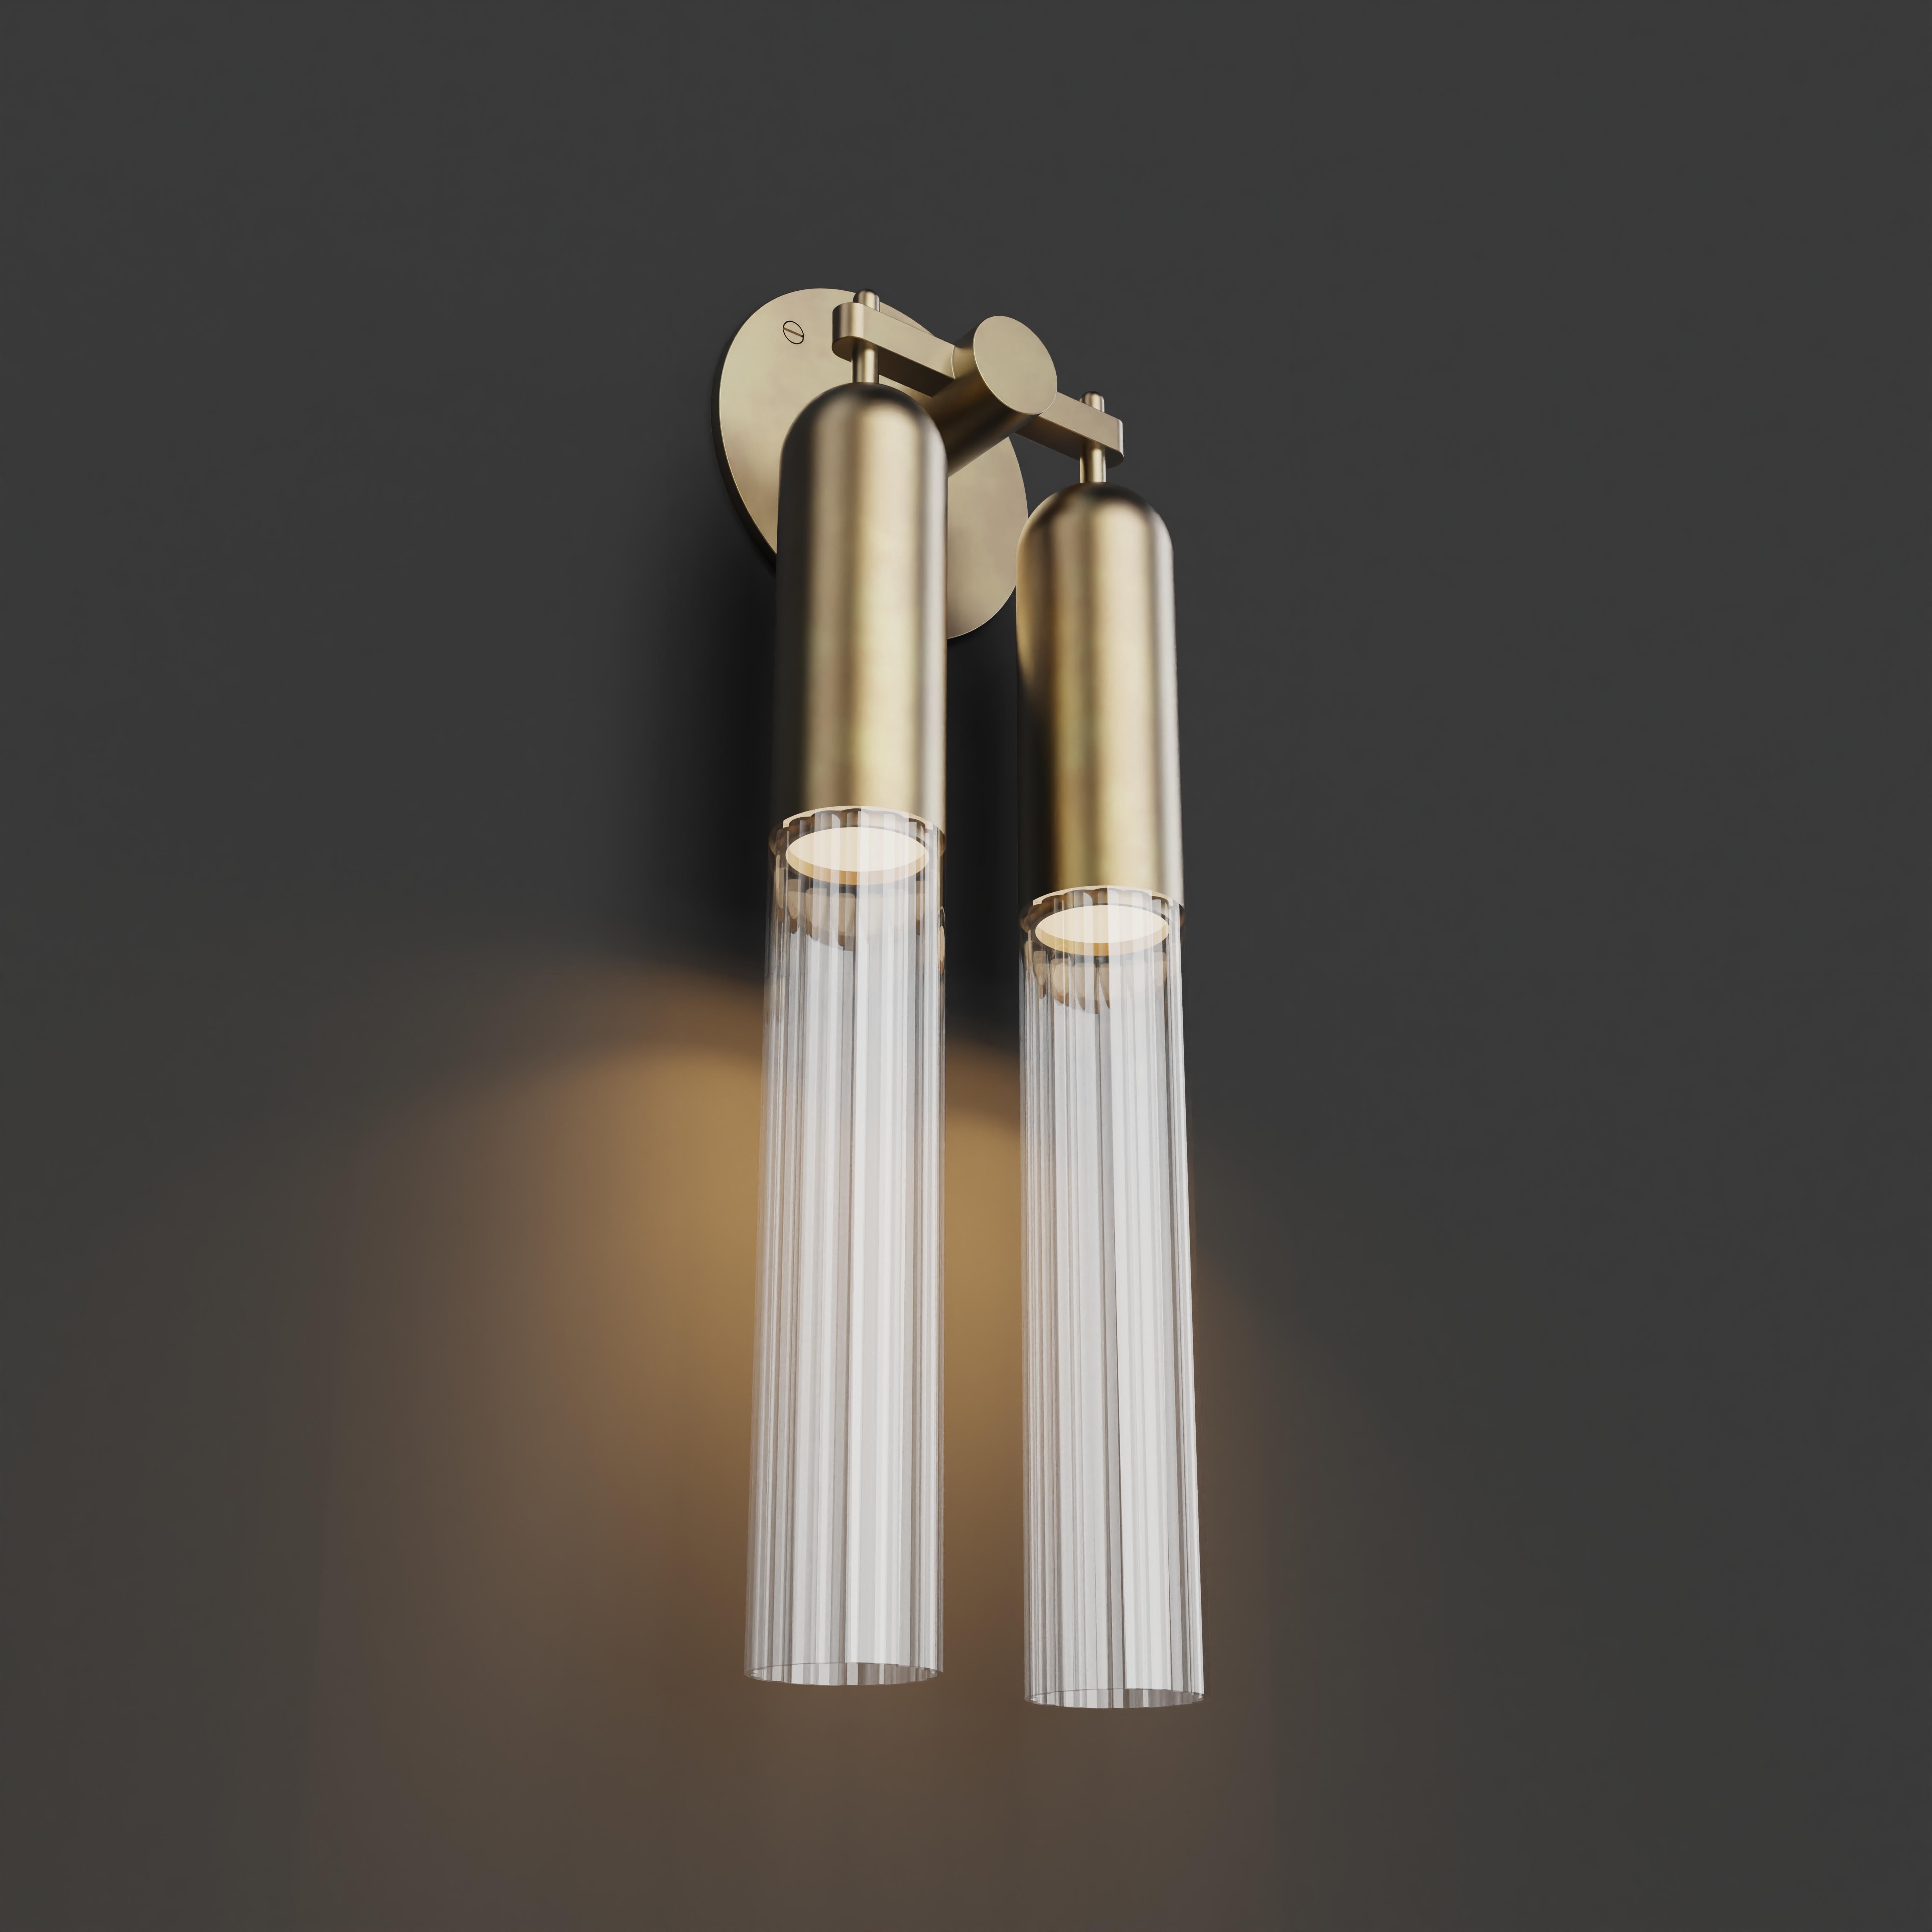 European Imagin Rigata Double Wall Sconce in Brushed Brass and Fluted Glass For Sale